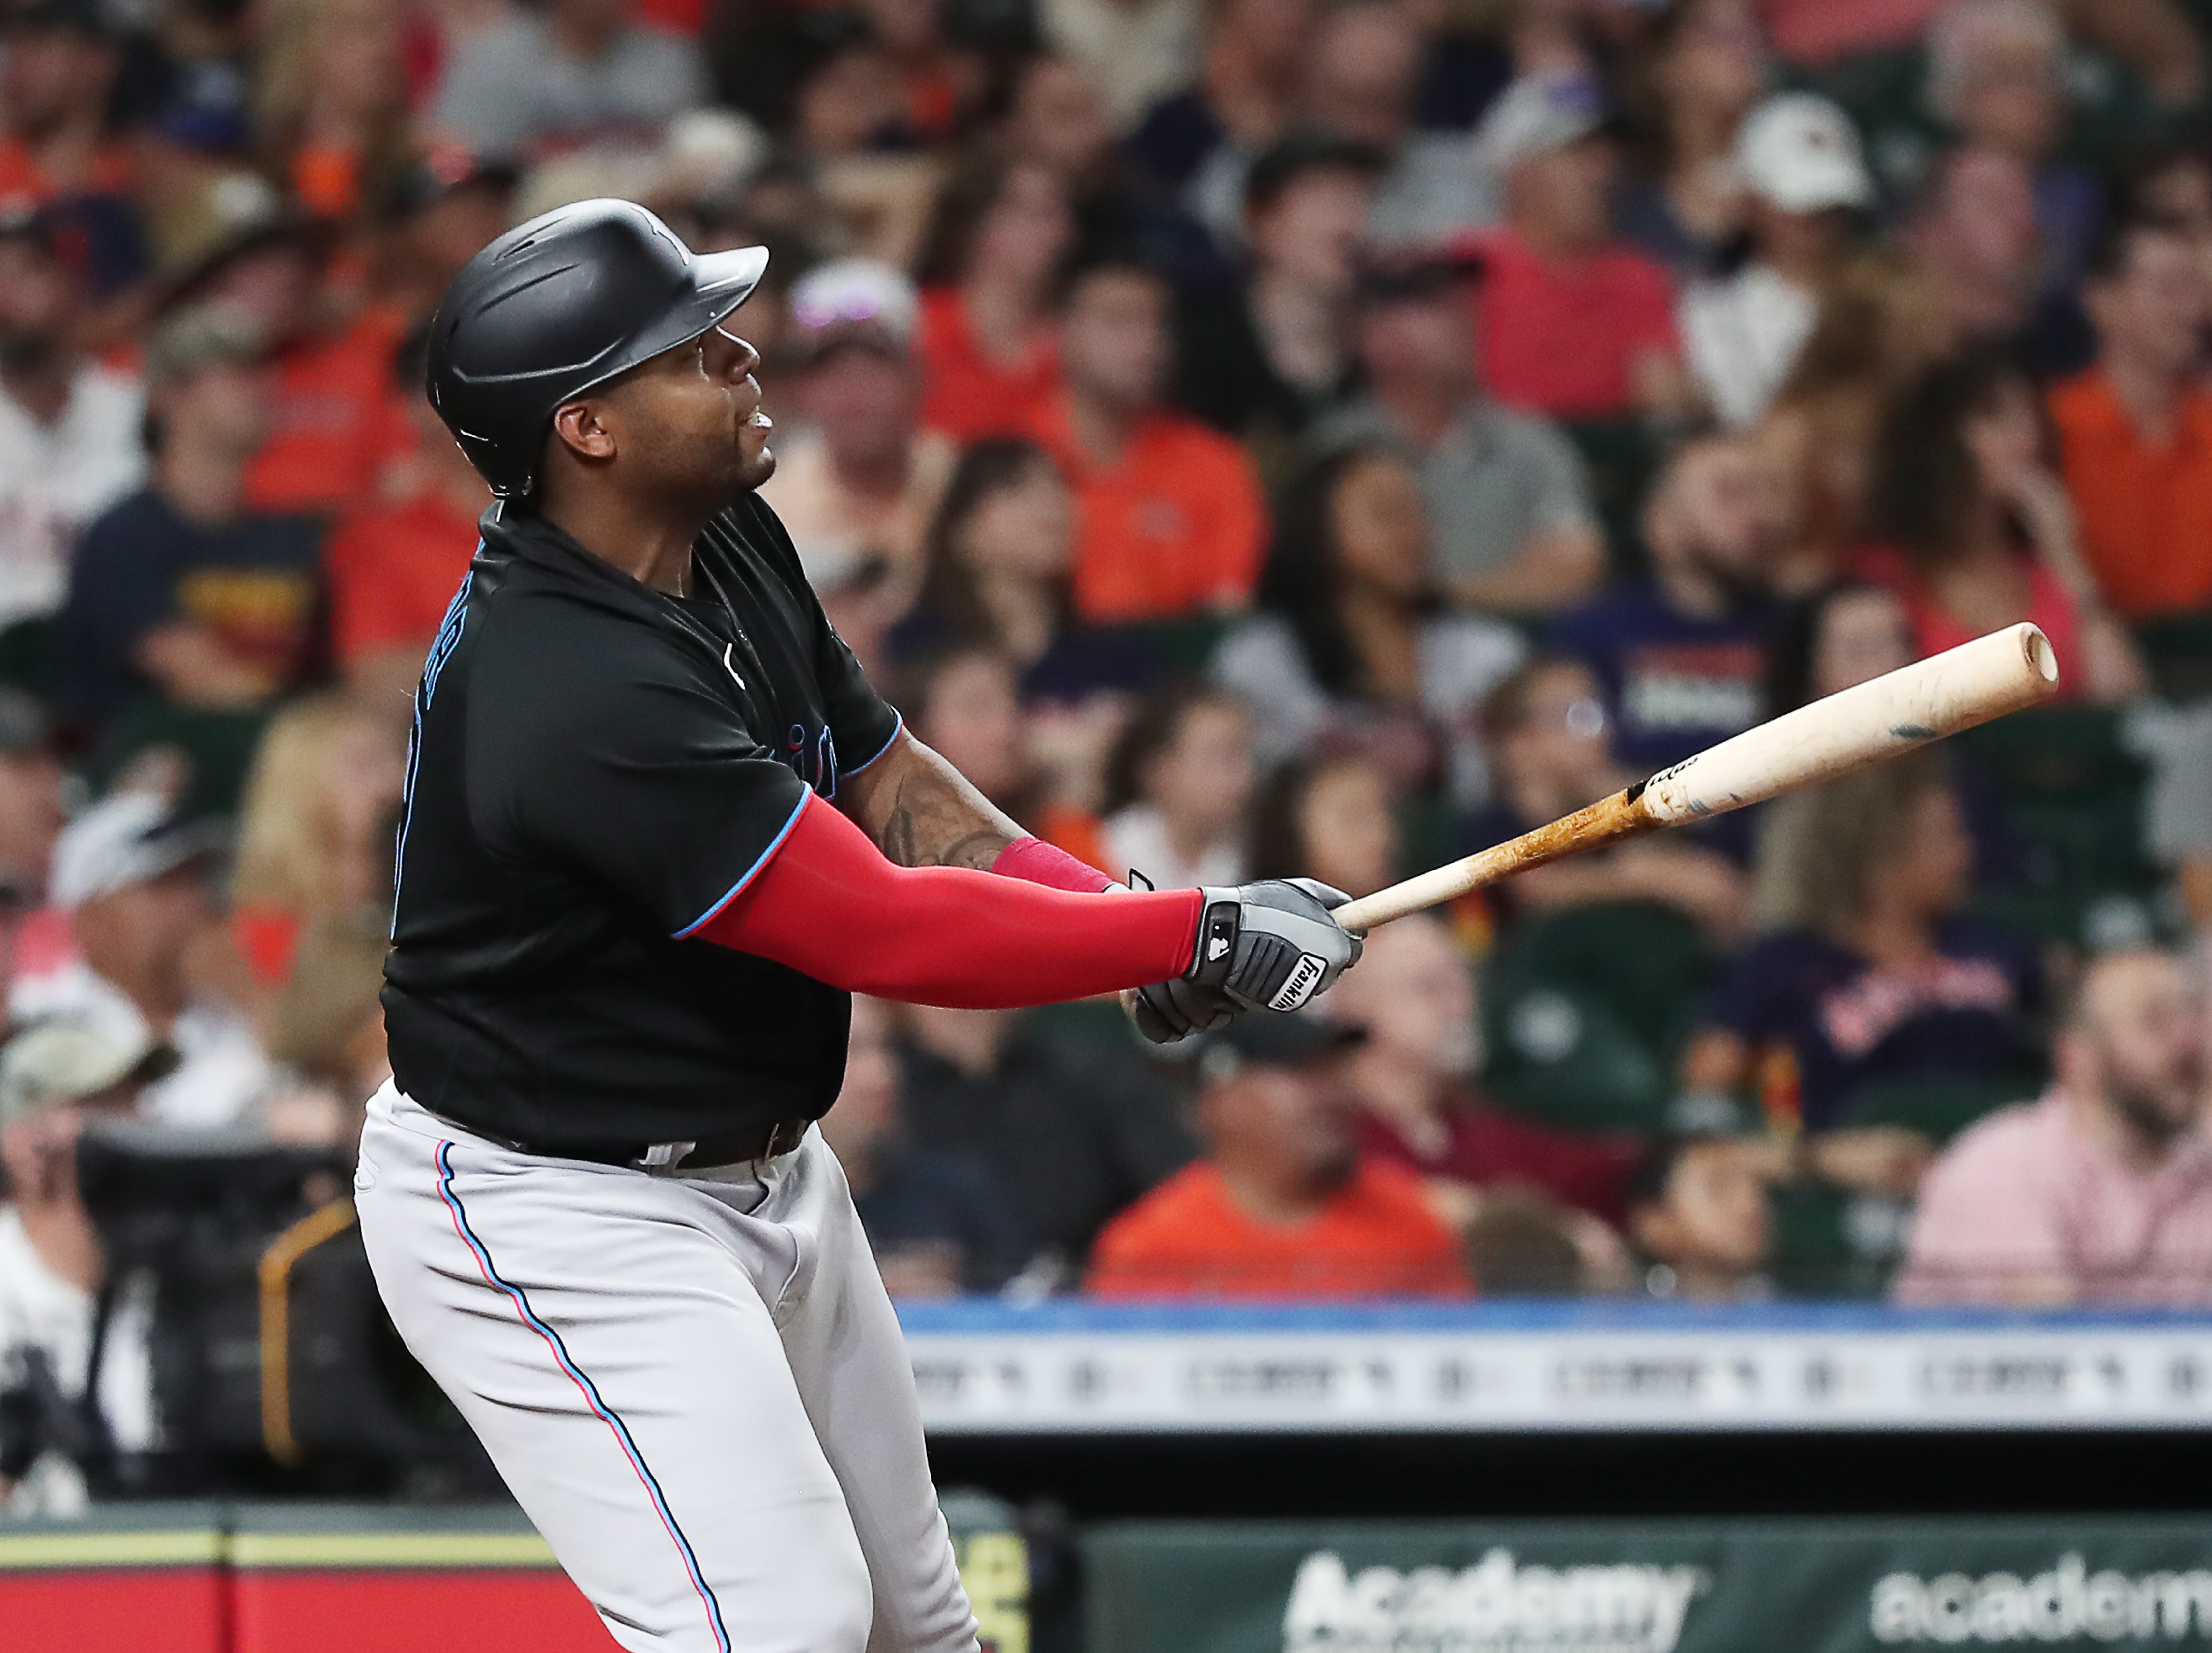 Aguilar, Marlins again swat away Nats, win third in a row on road